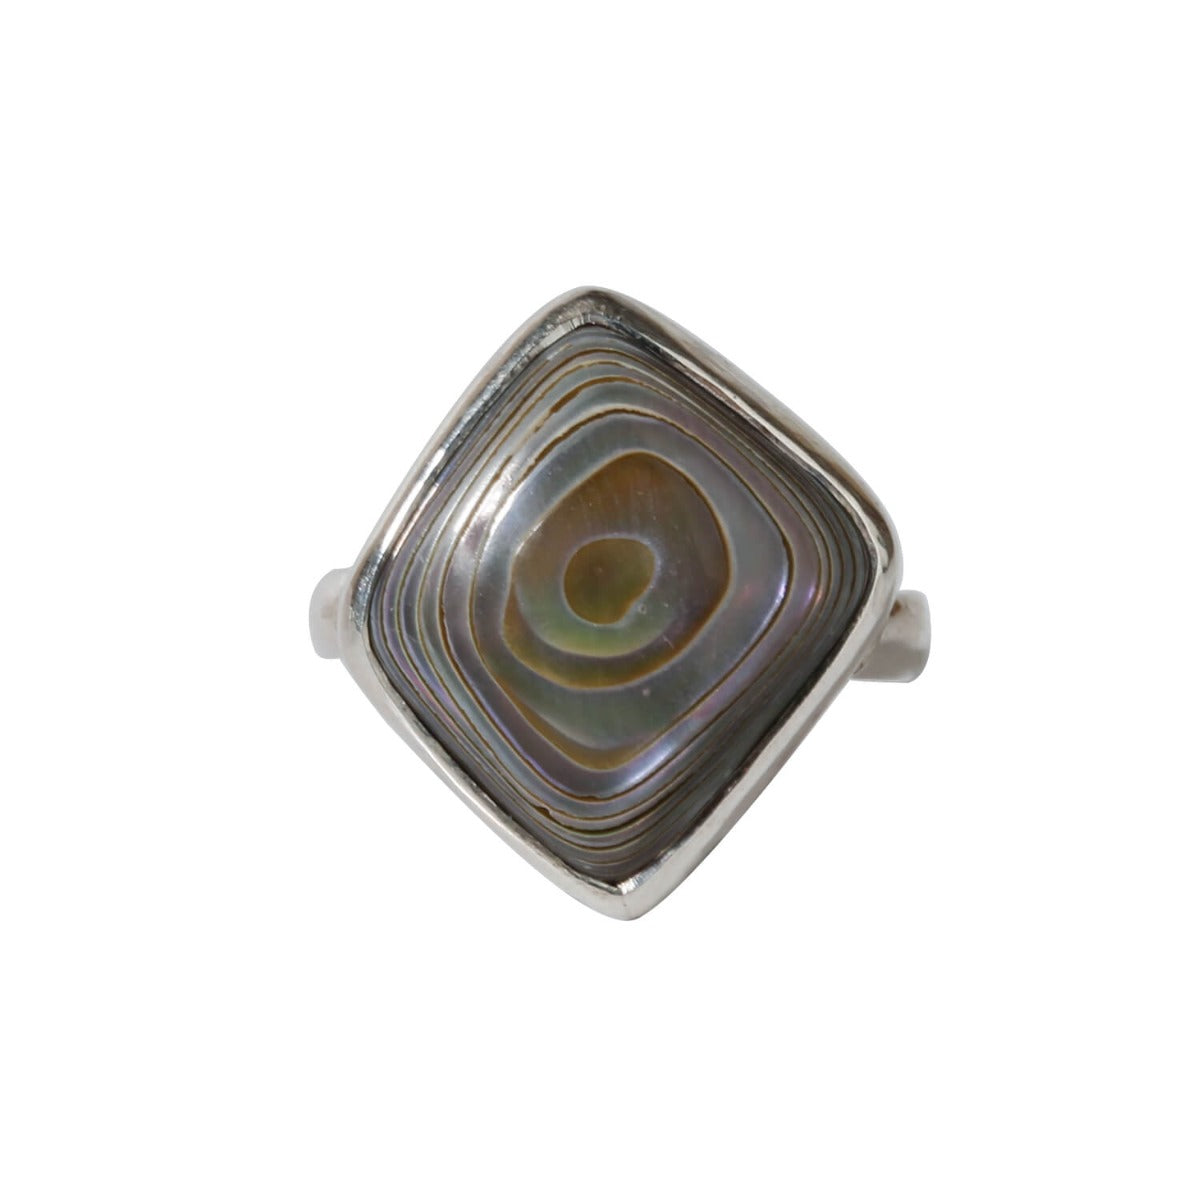 Sterling Silver Square Shape Ring With Abalone Shell